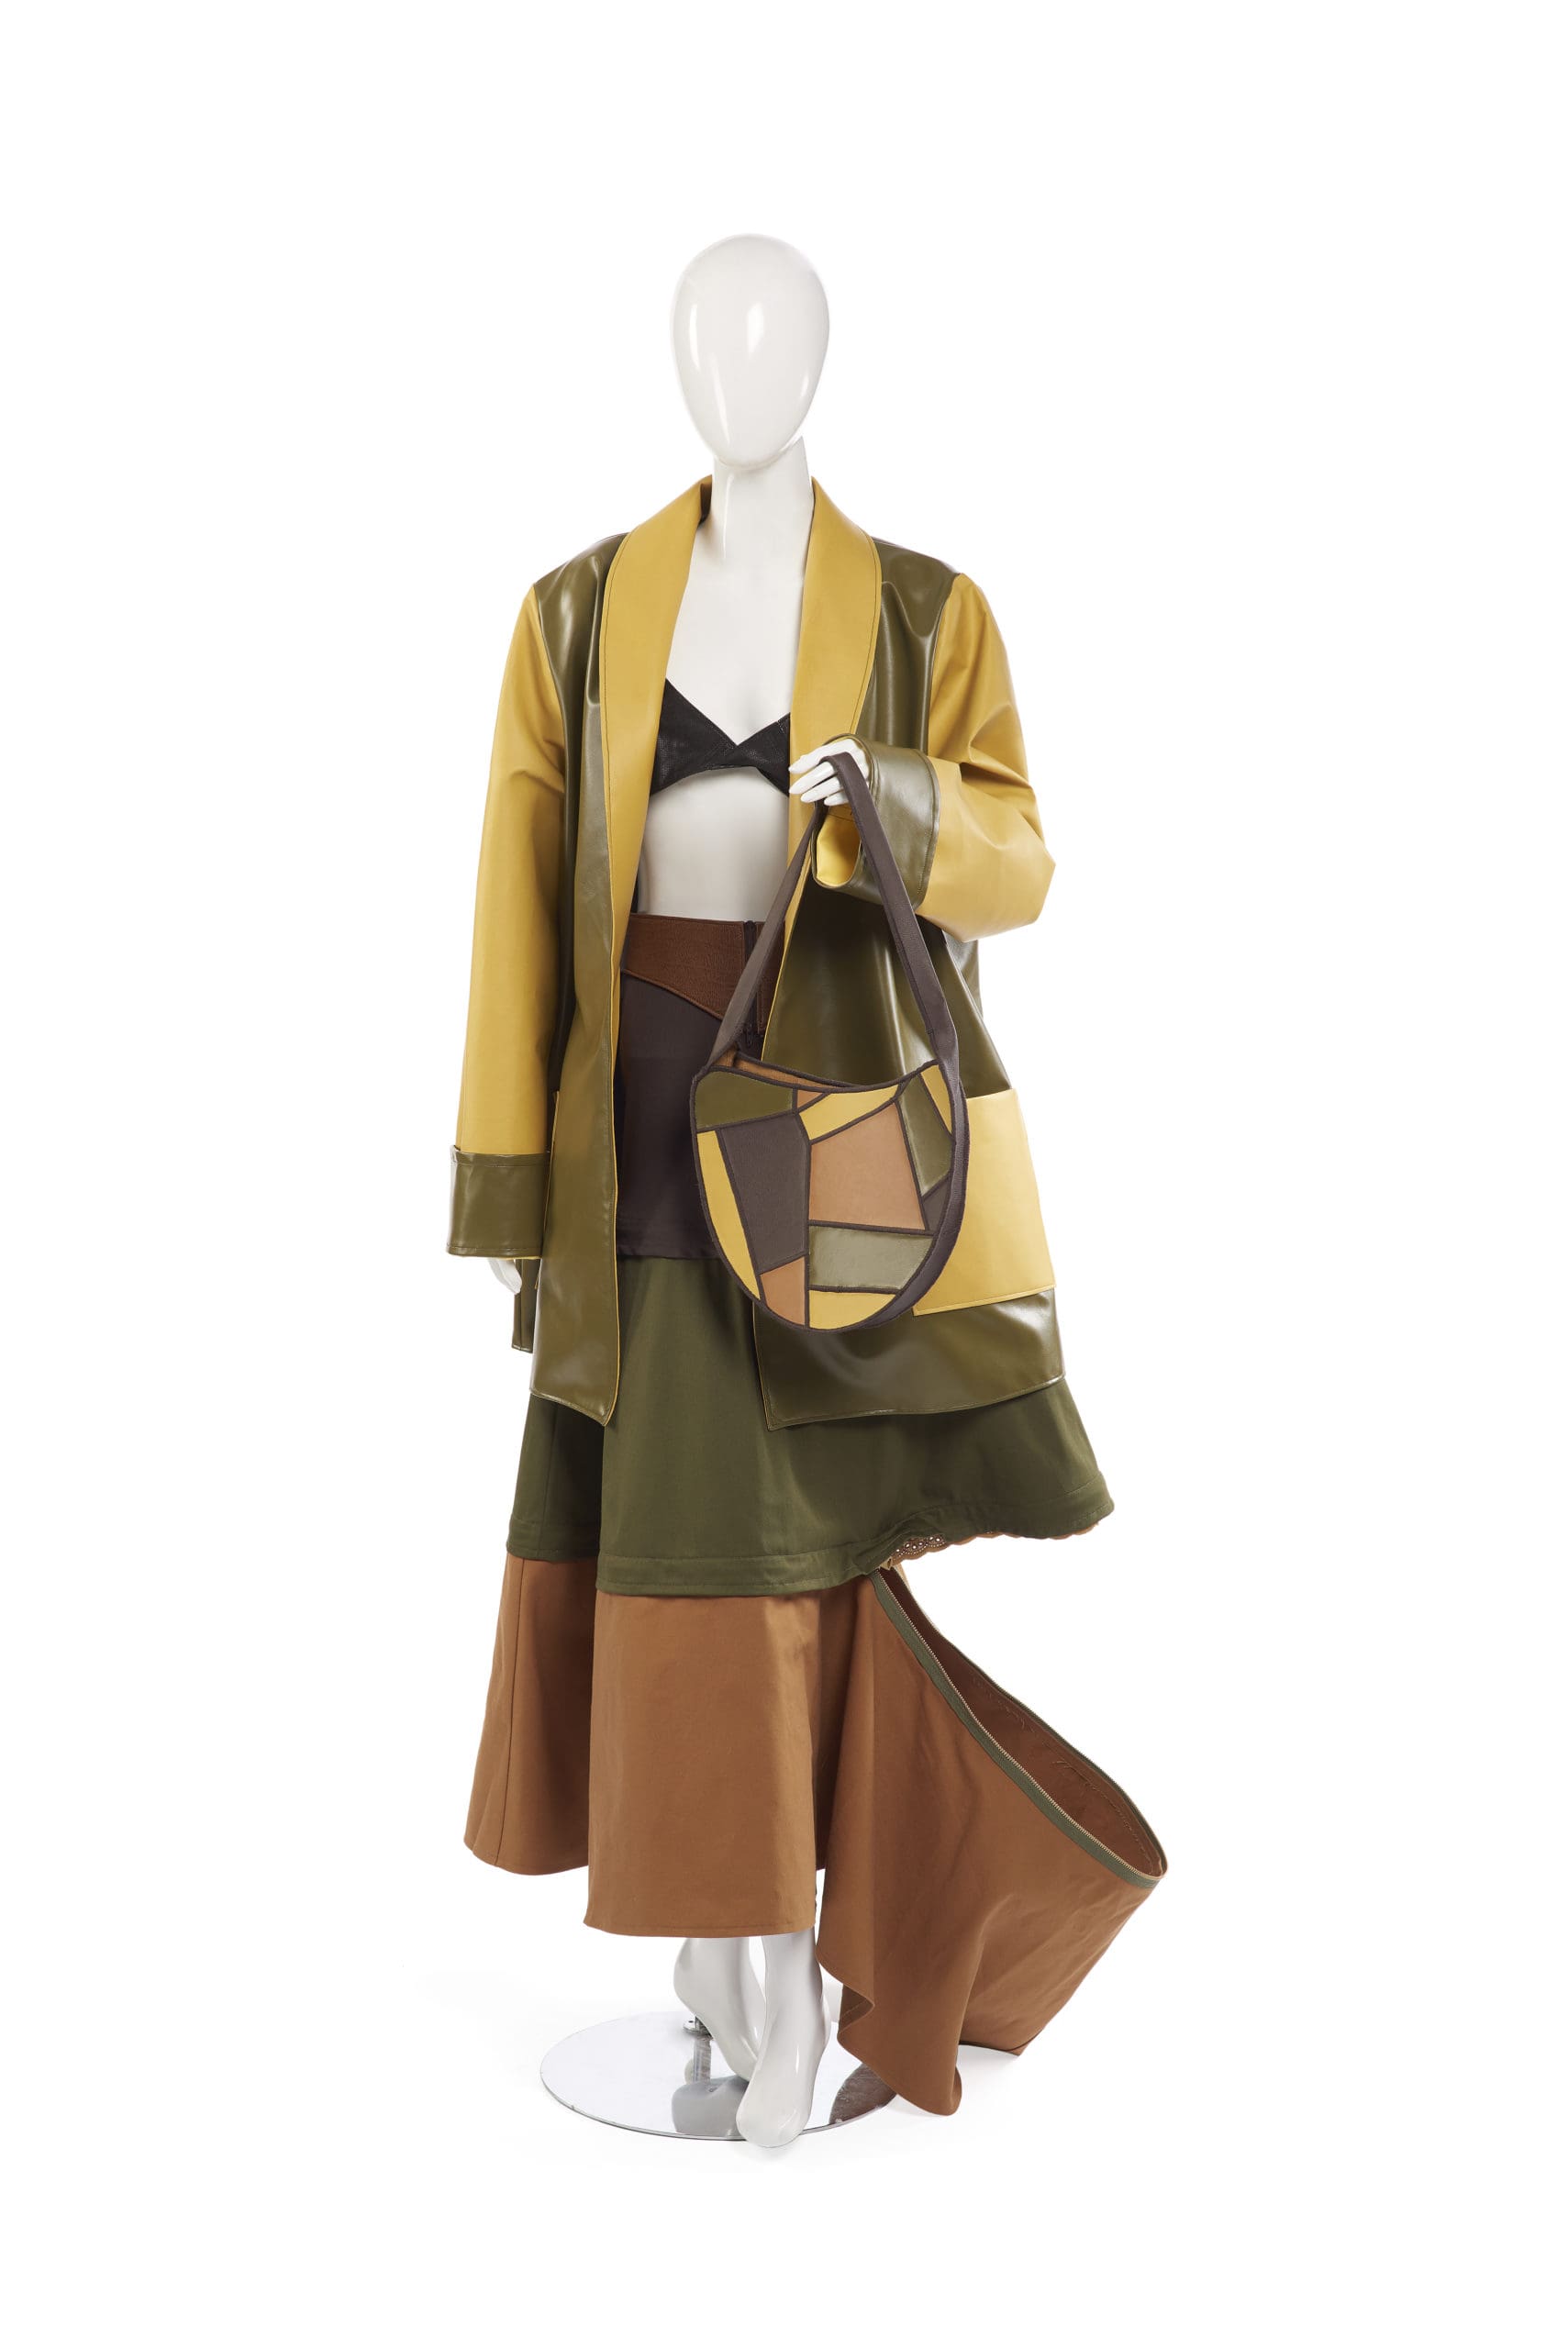 Margaret Henige. White mannequin wearing a long yellow and brown leather coat, a long skirt with separate green, brown, burnt orange and light brown layers, and holding a purse with a geometric shape design with the same colors as the dress.